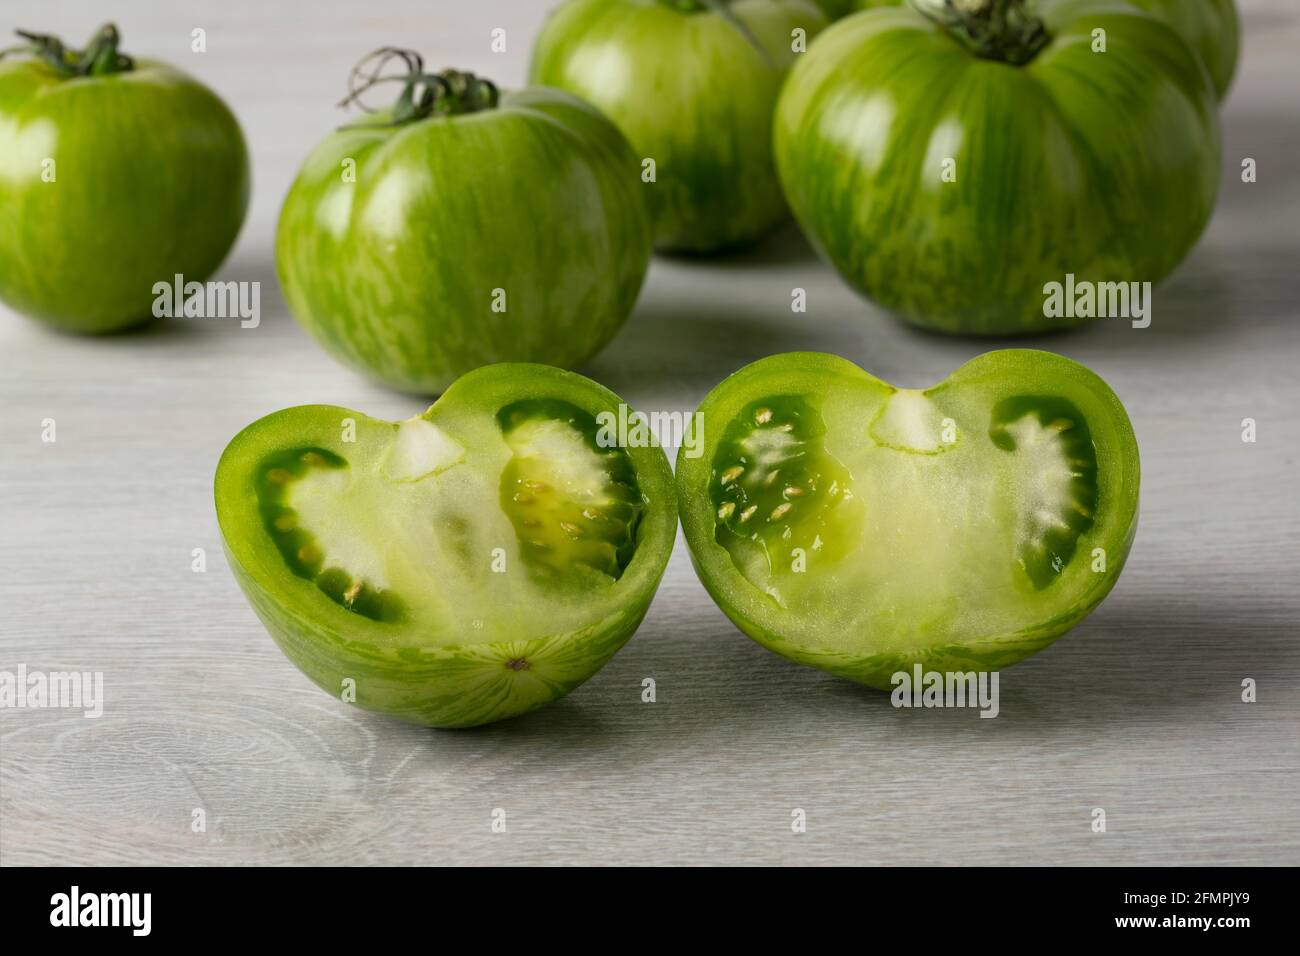 Whole and halved fresh green zebra tomato close up and tomatoes in the background Stock Photo